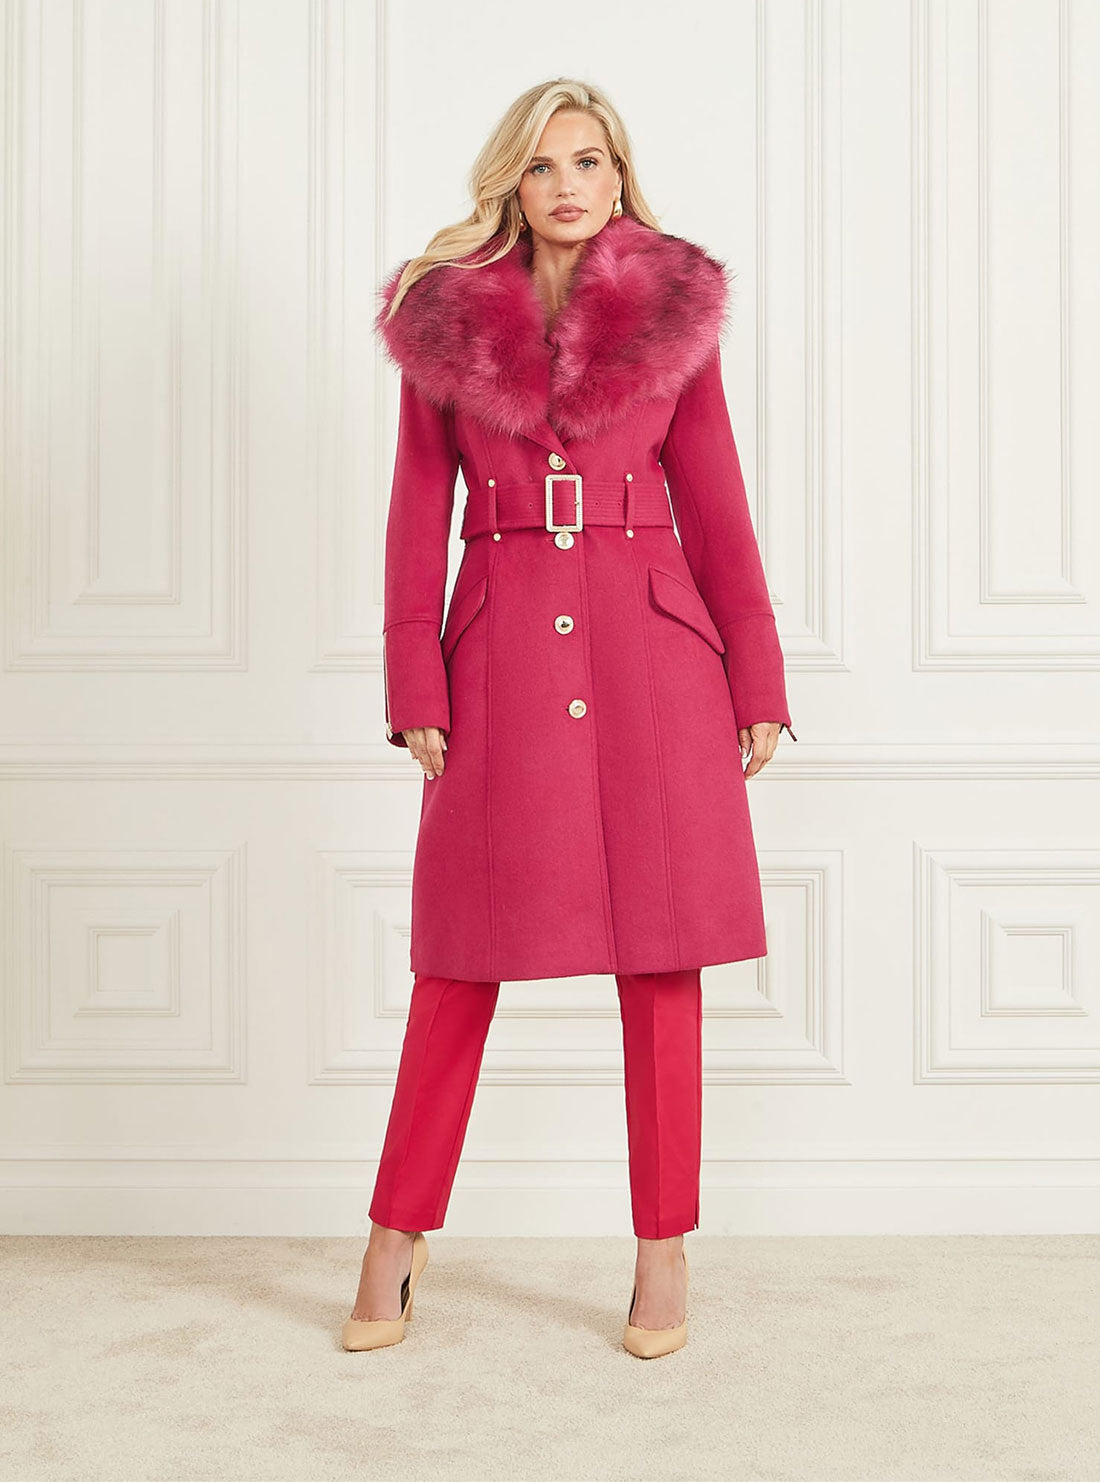 GUESS Marciano Pink Alice Coat full view